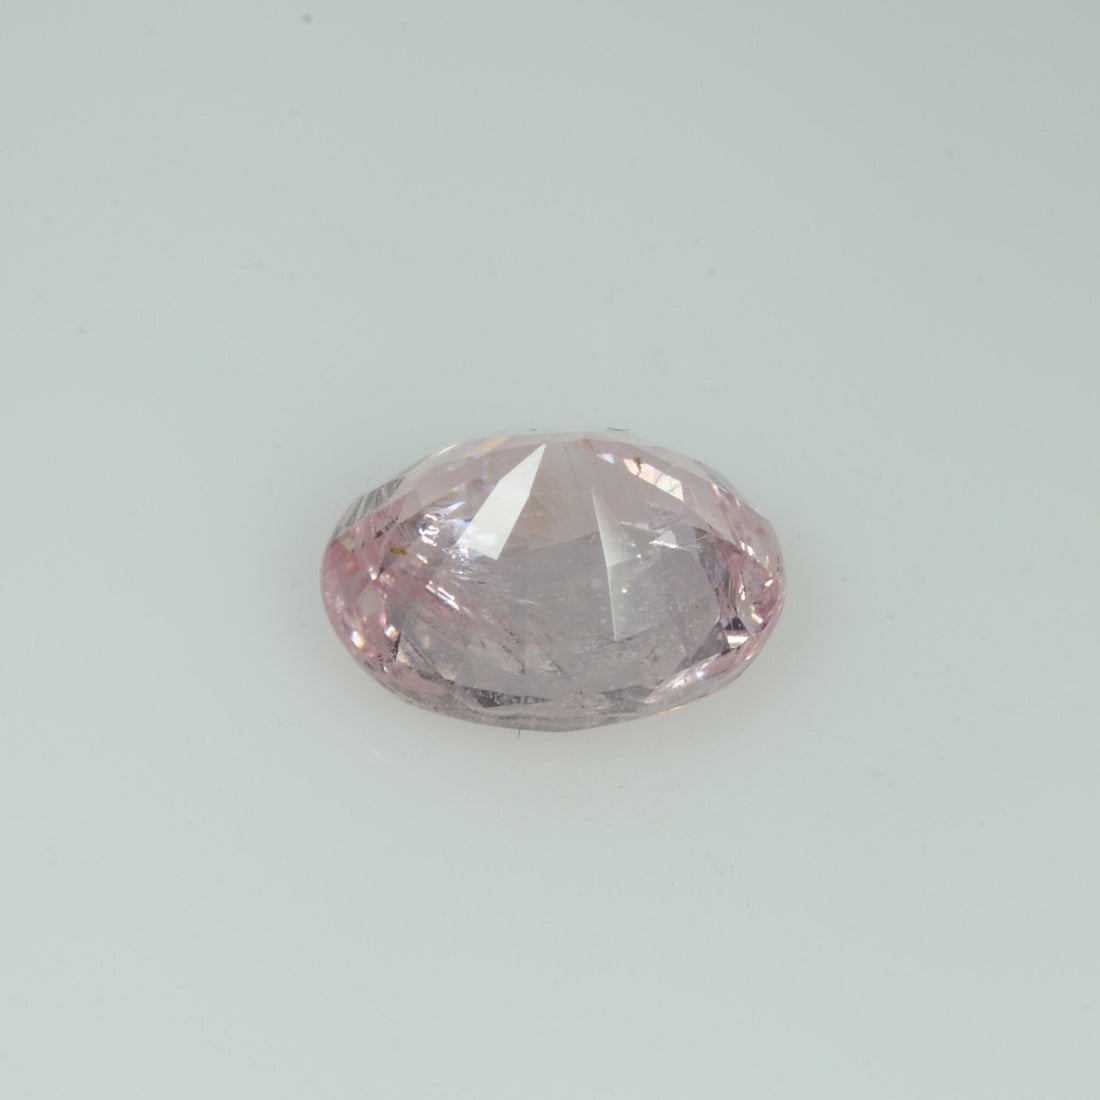 2.56 cts Natural Fancy Peach Sapphire Loose Gemstone oval Cut